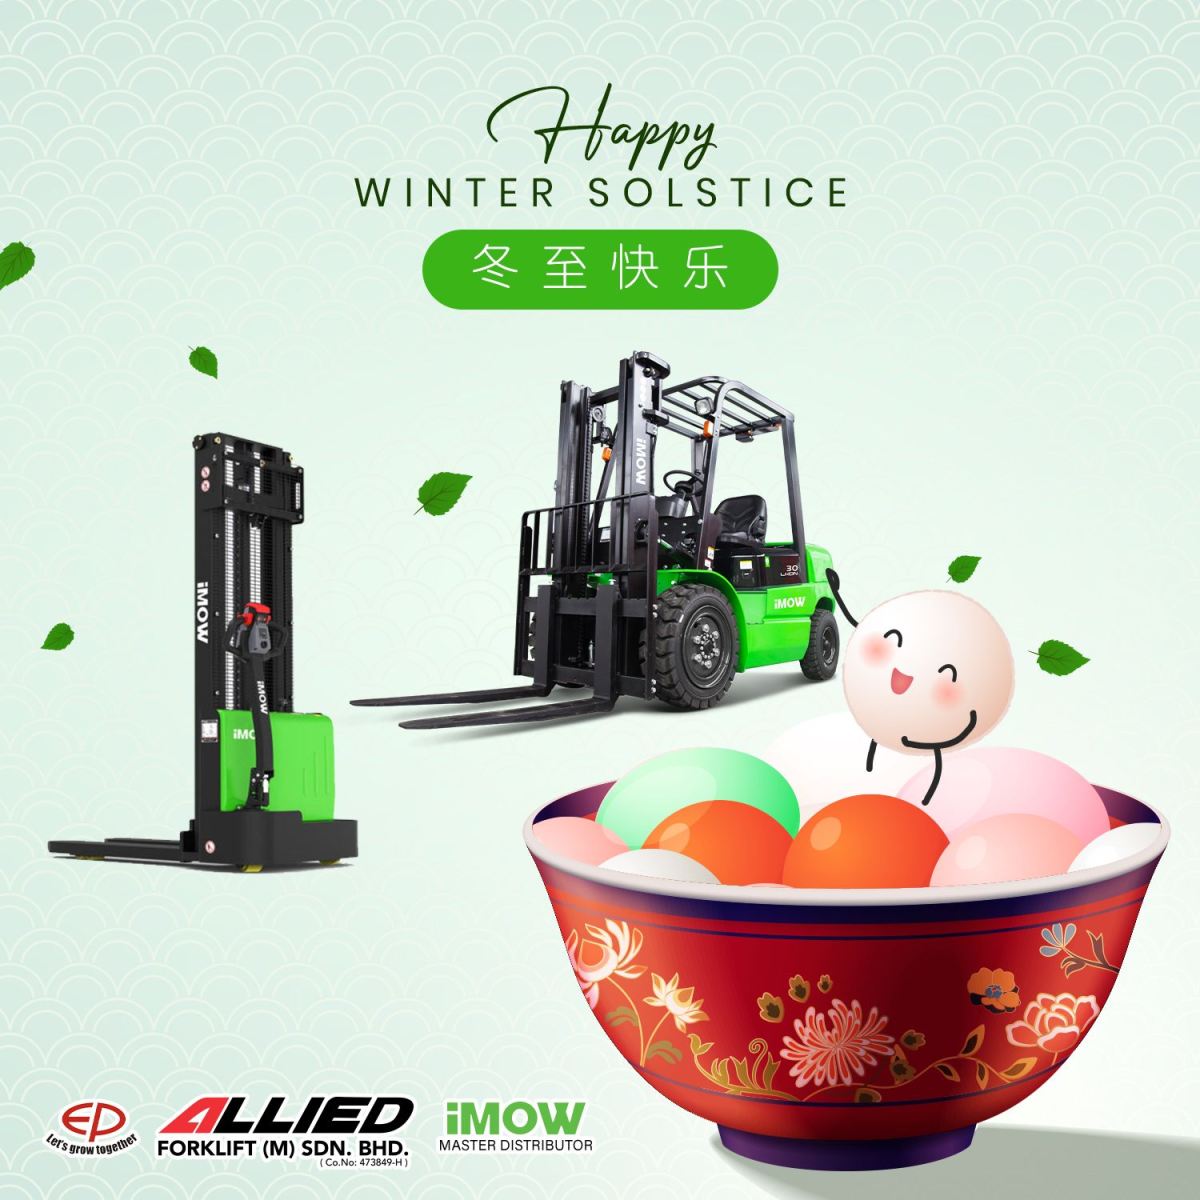 Happy Winter Solstice! Greetings From Allied Forklift